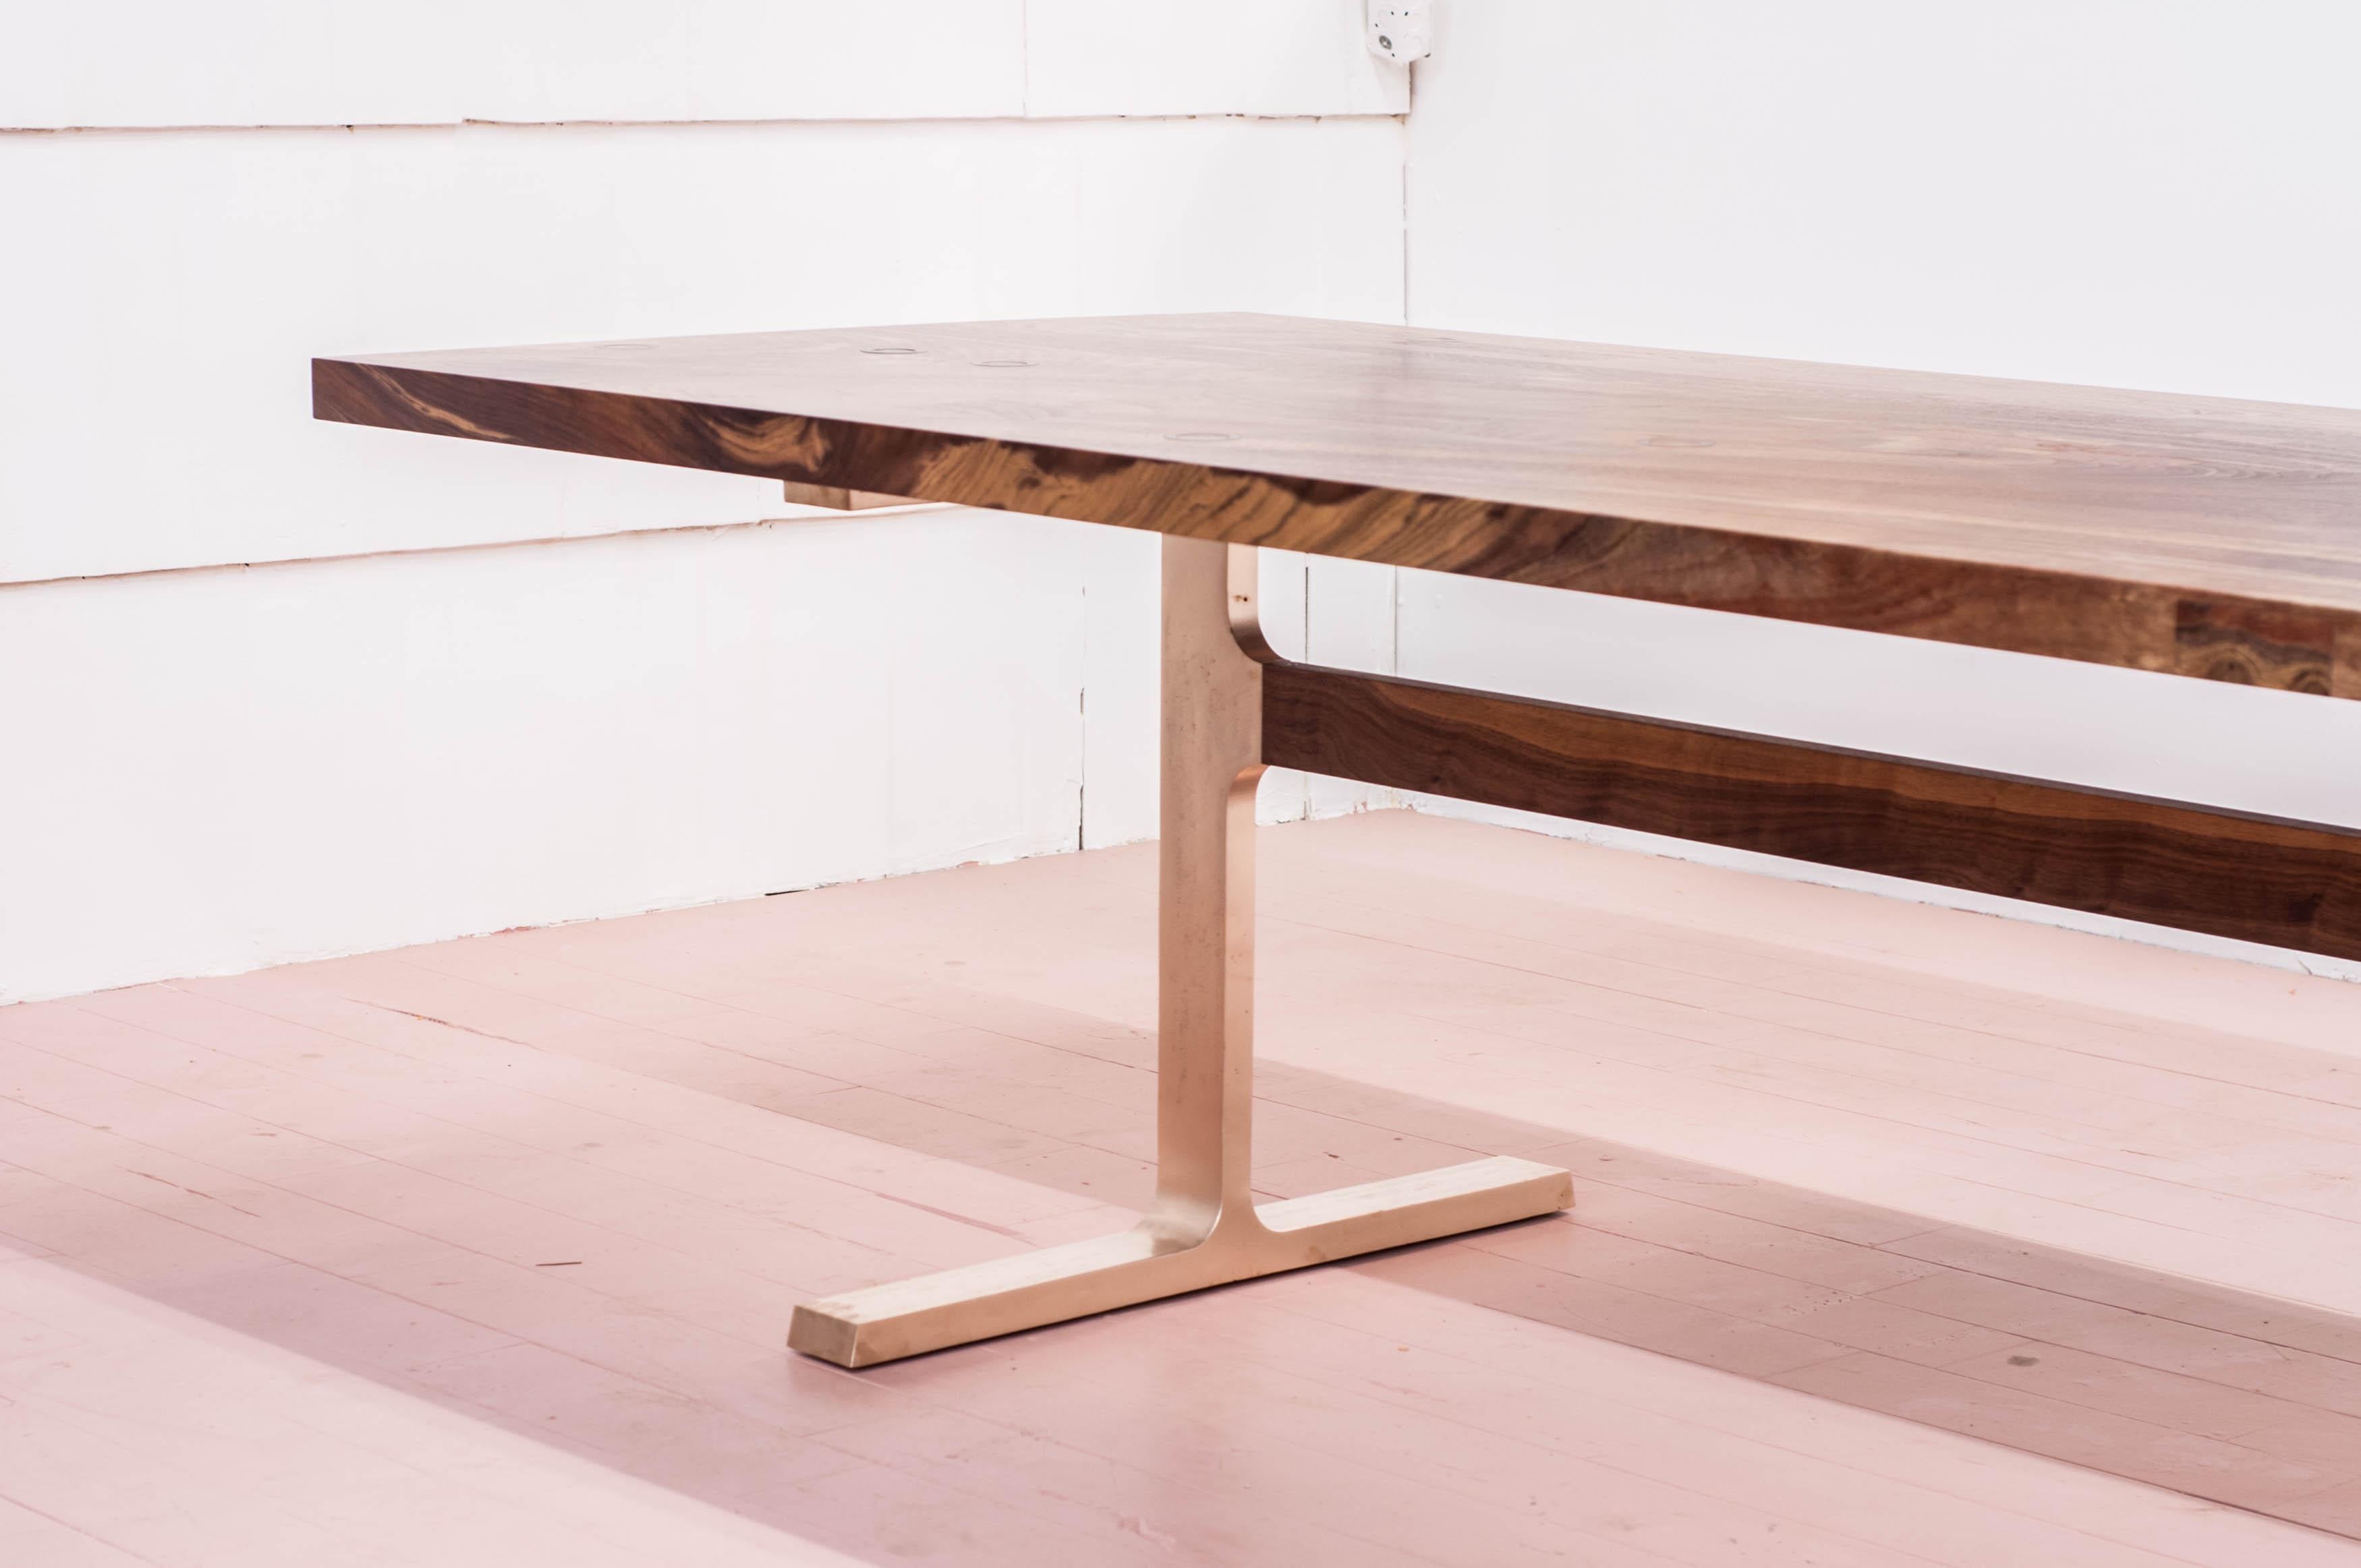 Distilled to its purest elements, the bronze Shaker table utilizes cast joinery components in the bronze legs and inlayed bronze rings in the wood top.

Available rectangular or as an oval. Custom sizing, configuration, and material choices